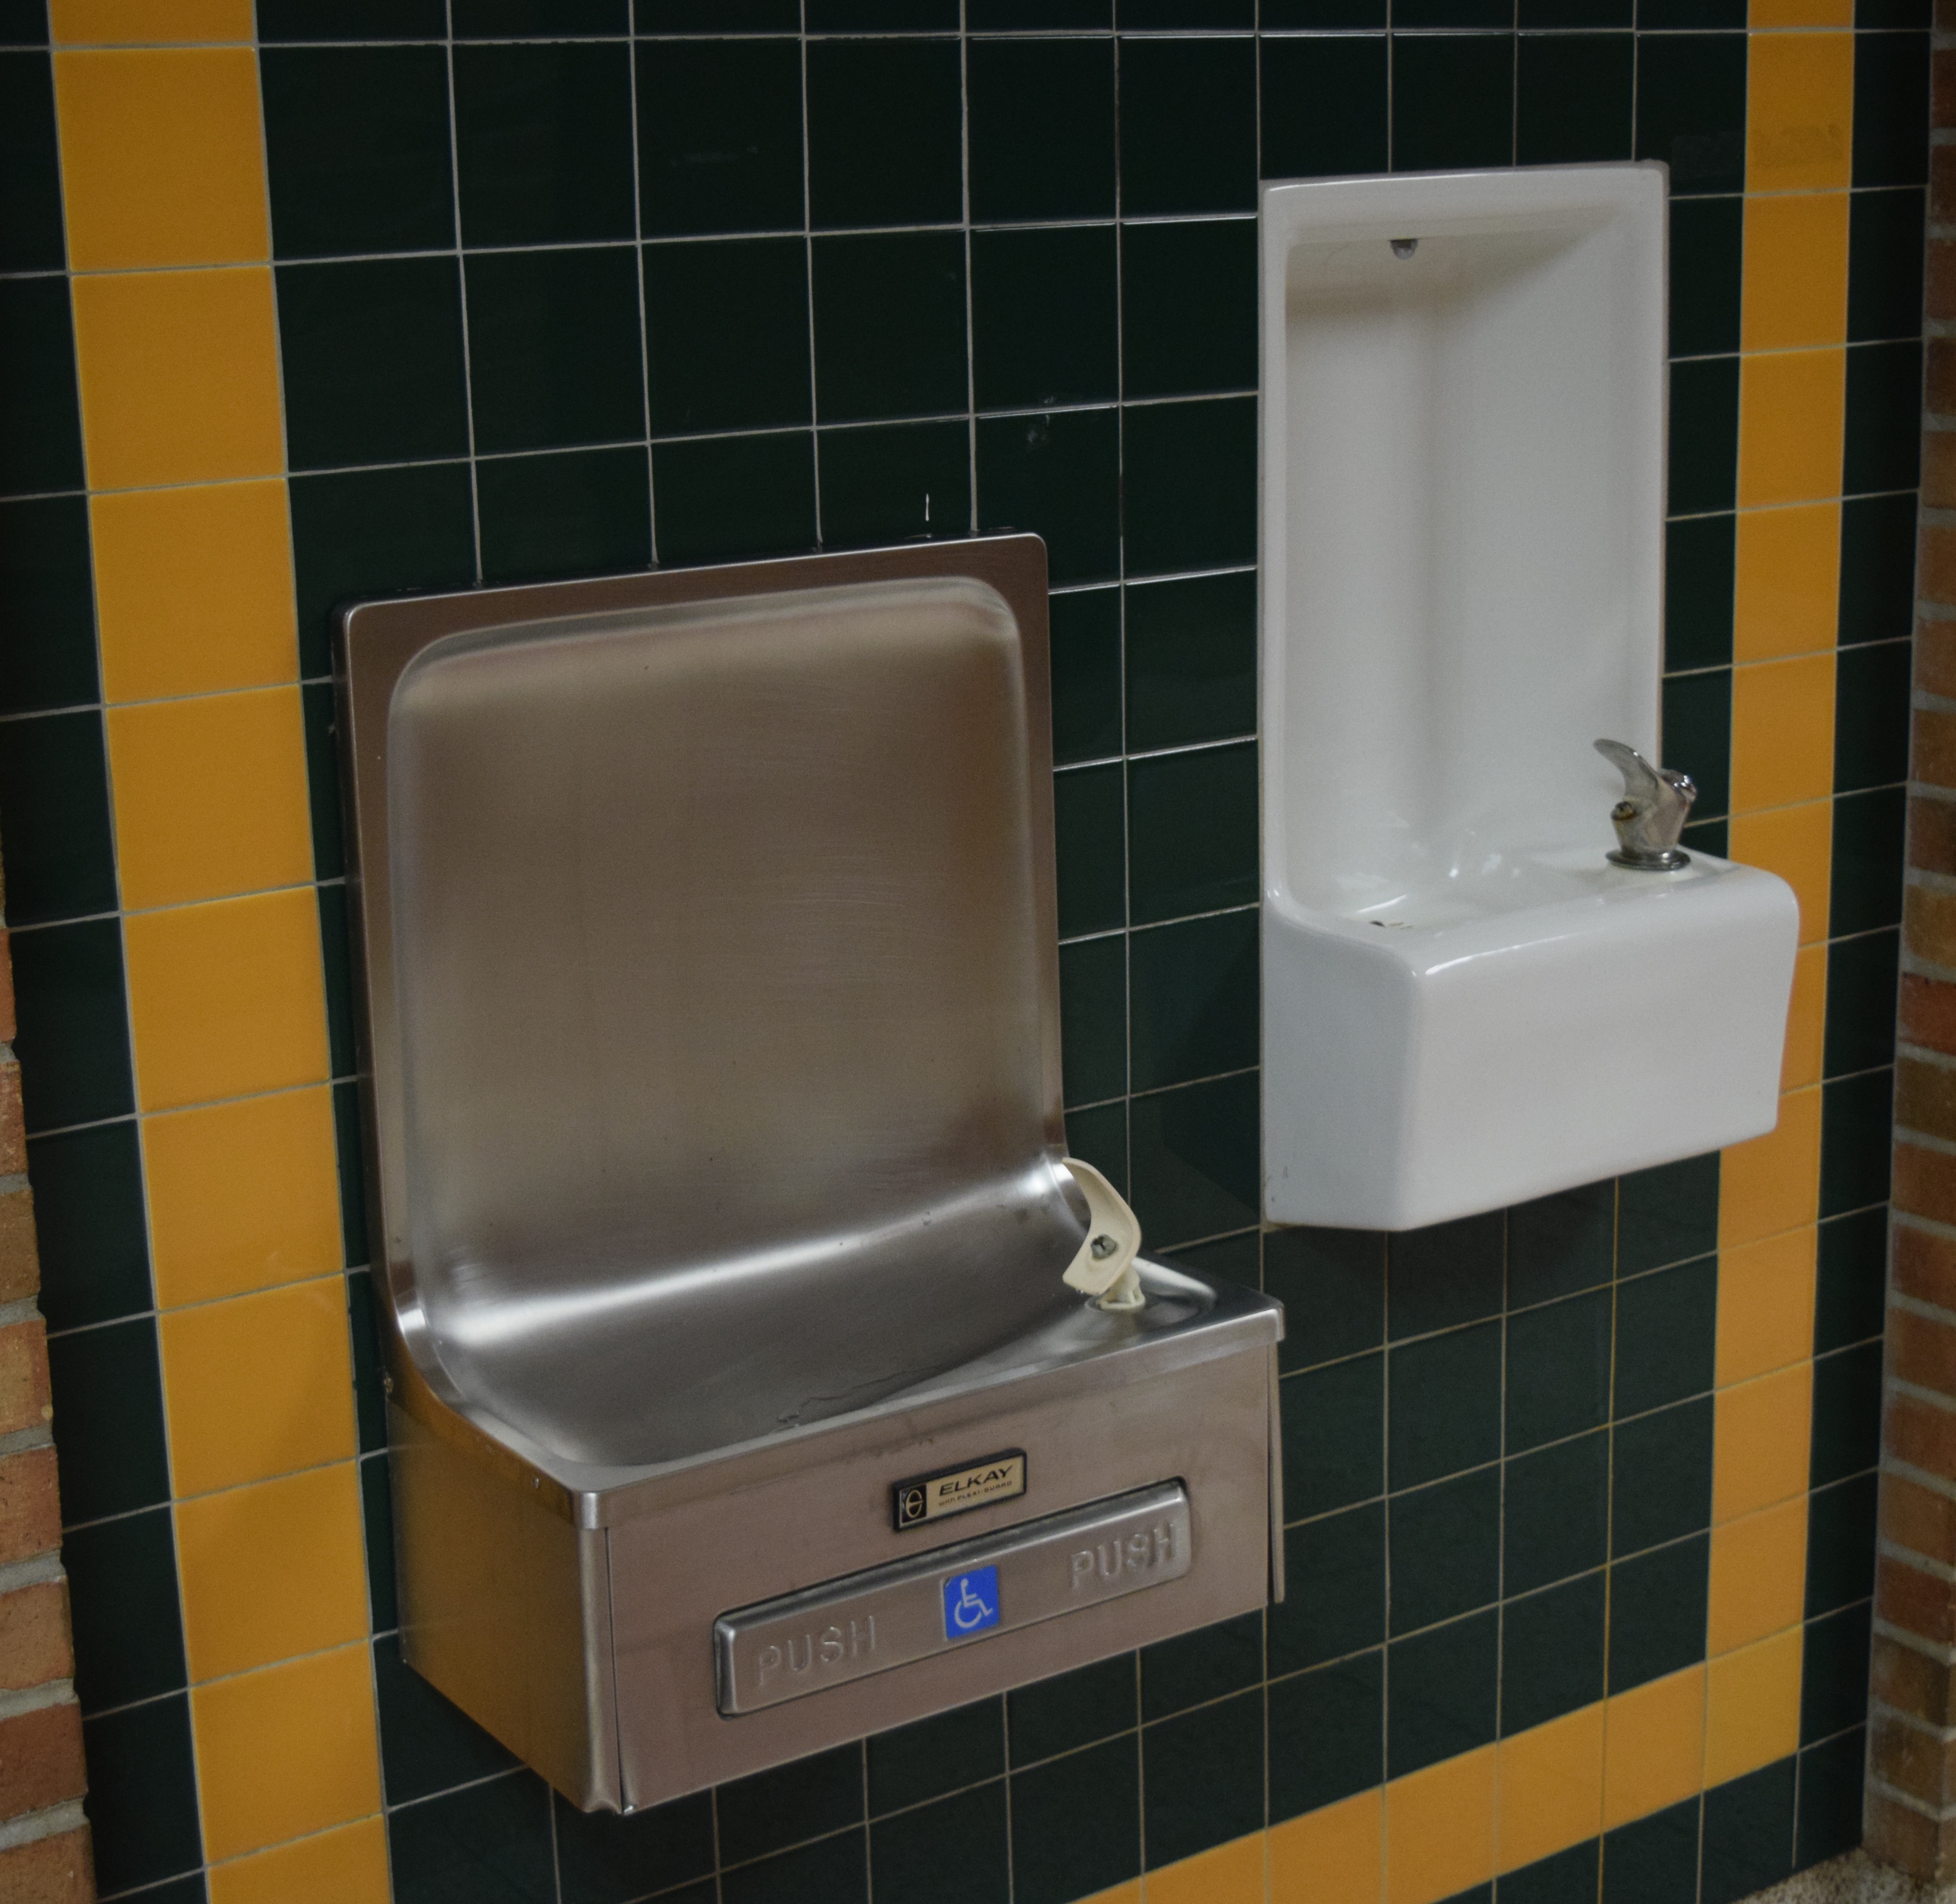 Two water fountains at Huron High School